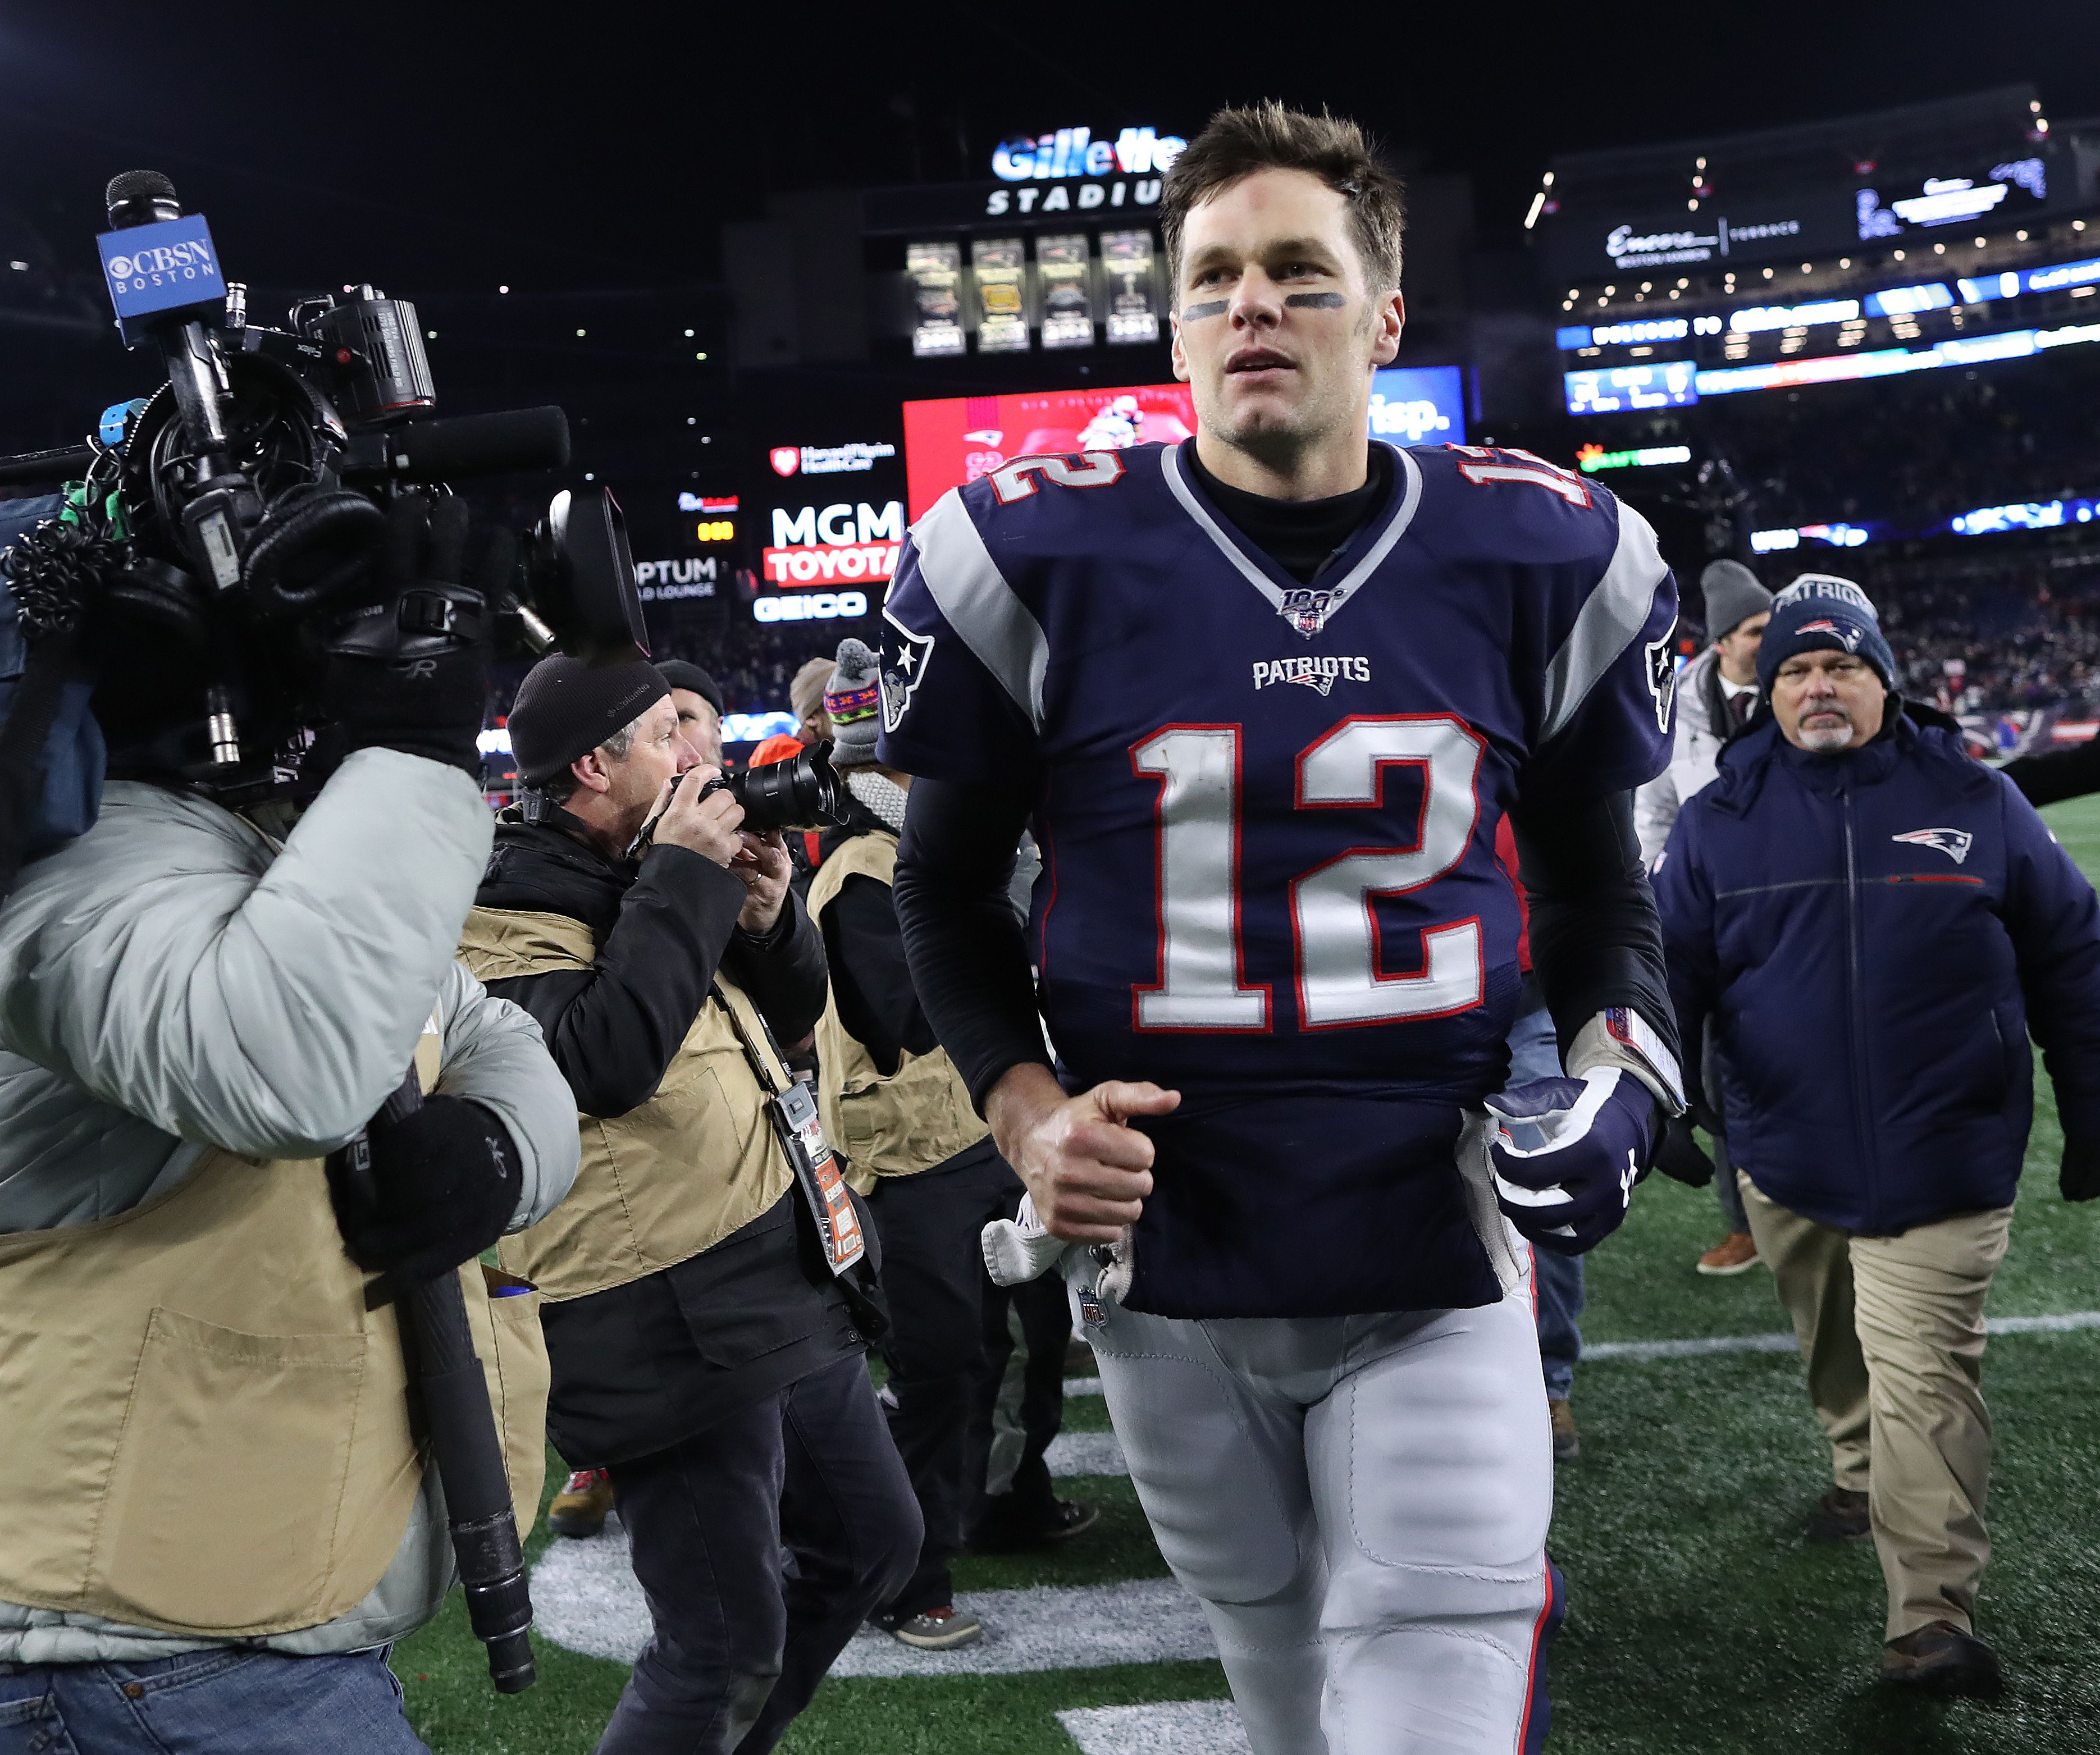 Tom Brady is old, in decline, and perfectly capable of winning another  Super Bowl.